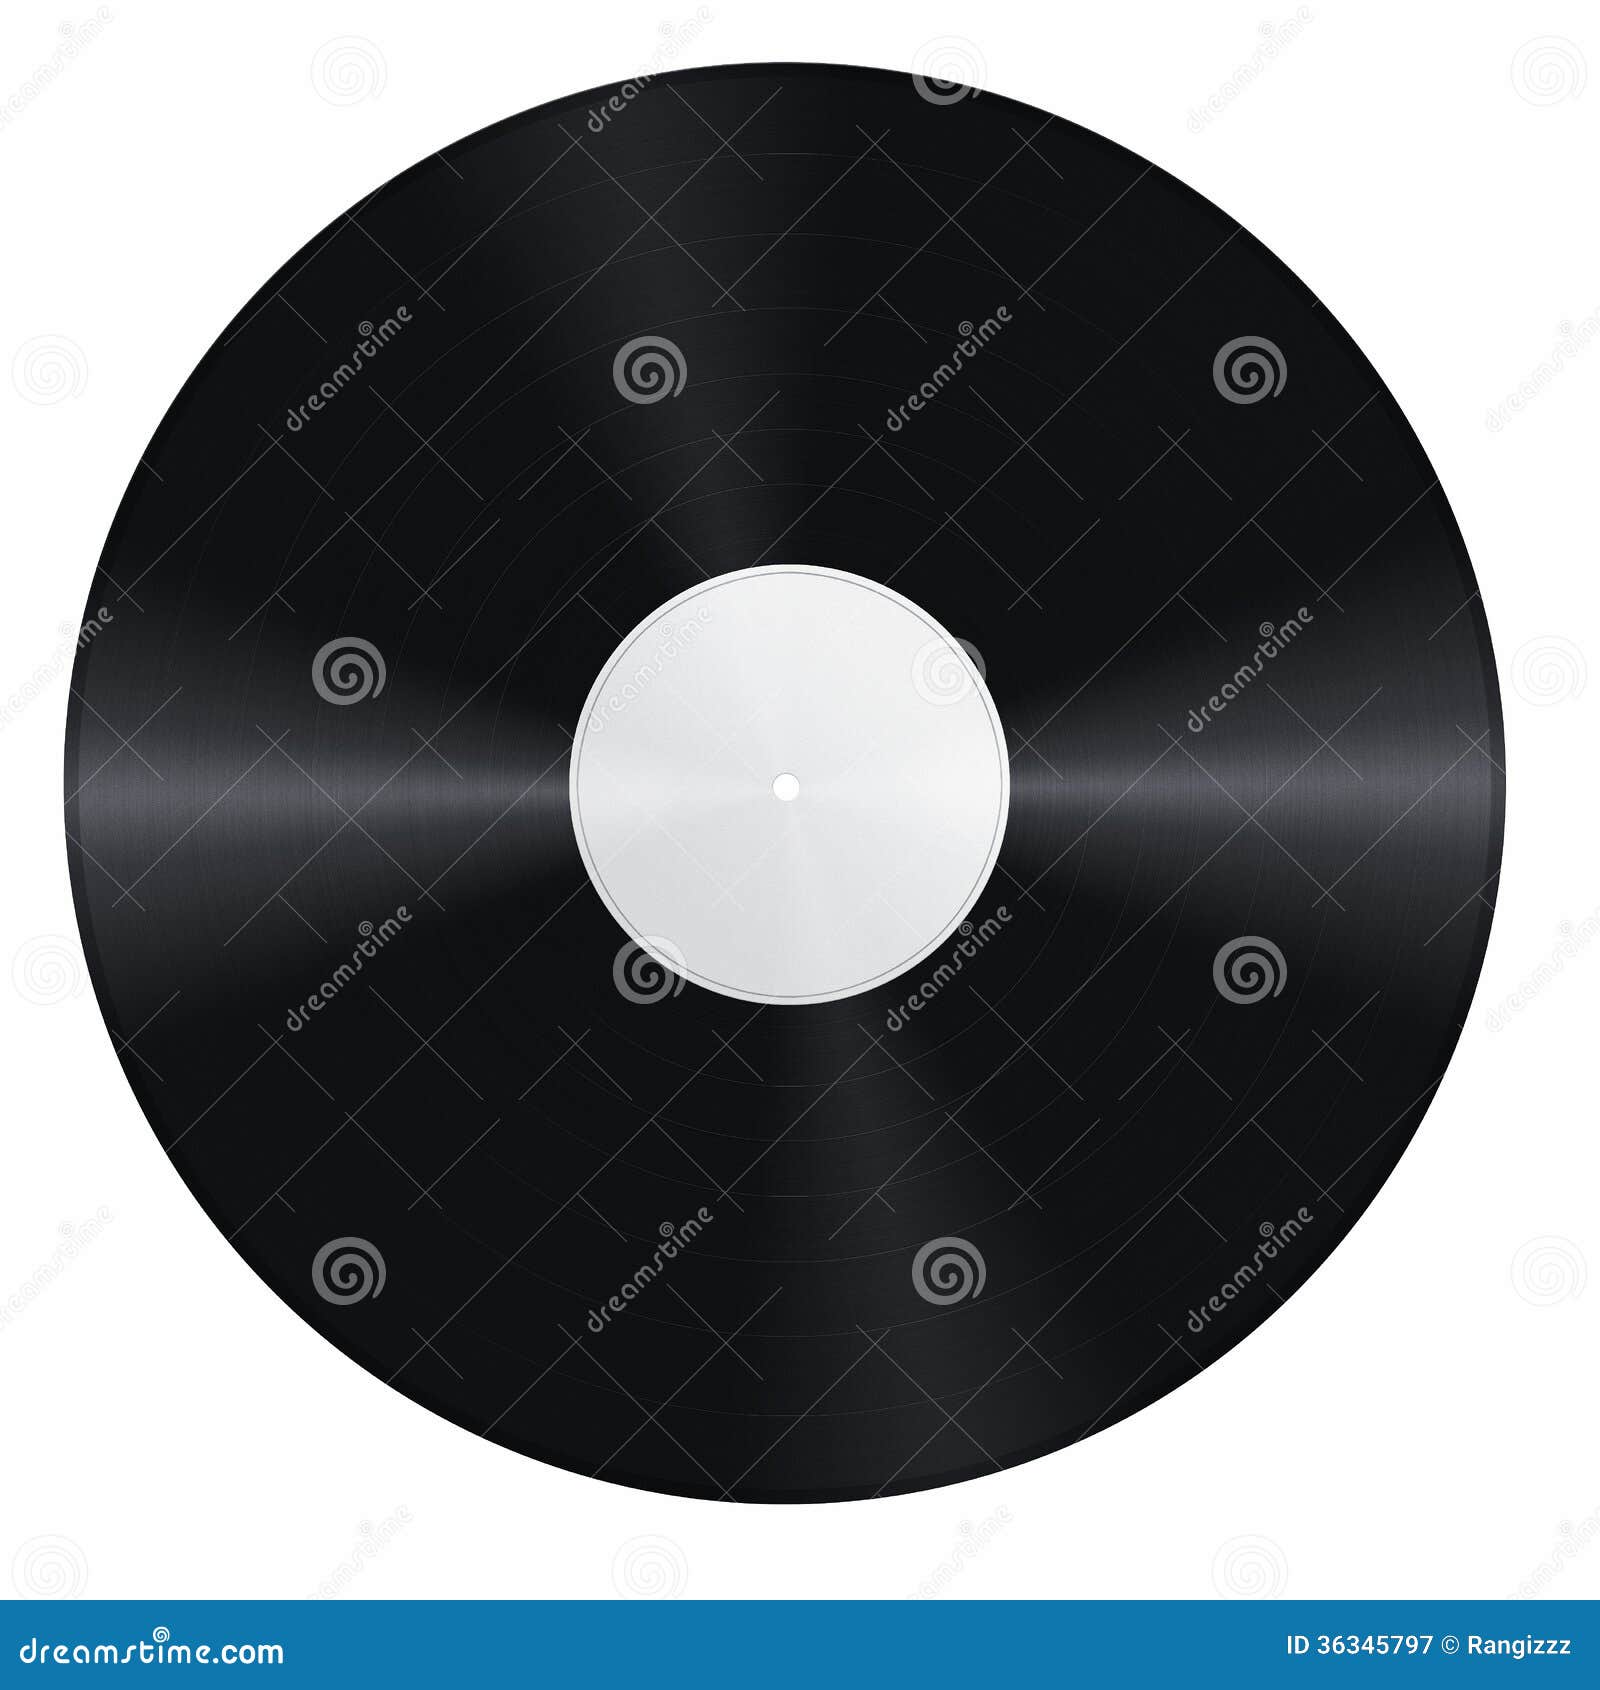 Blank vinyl record isolated on white background with clipping path.